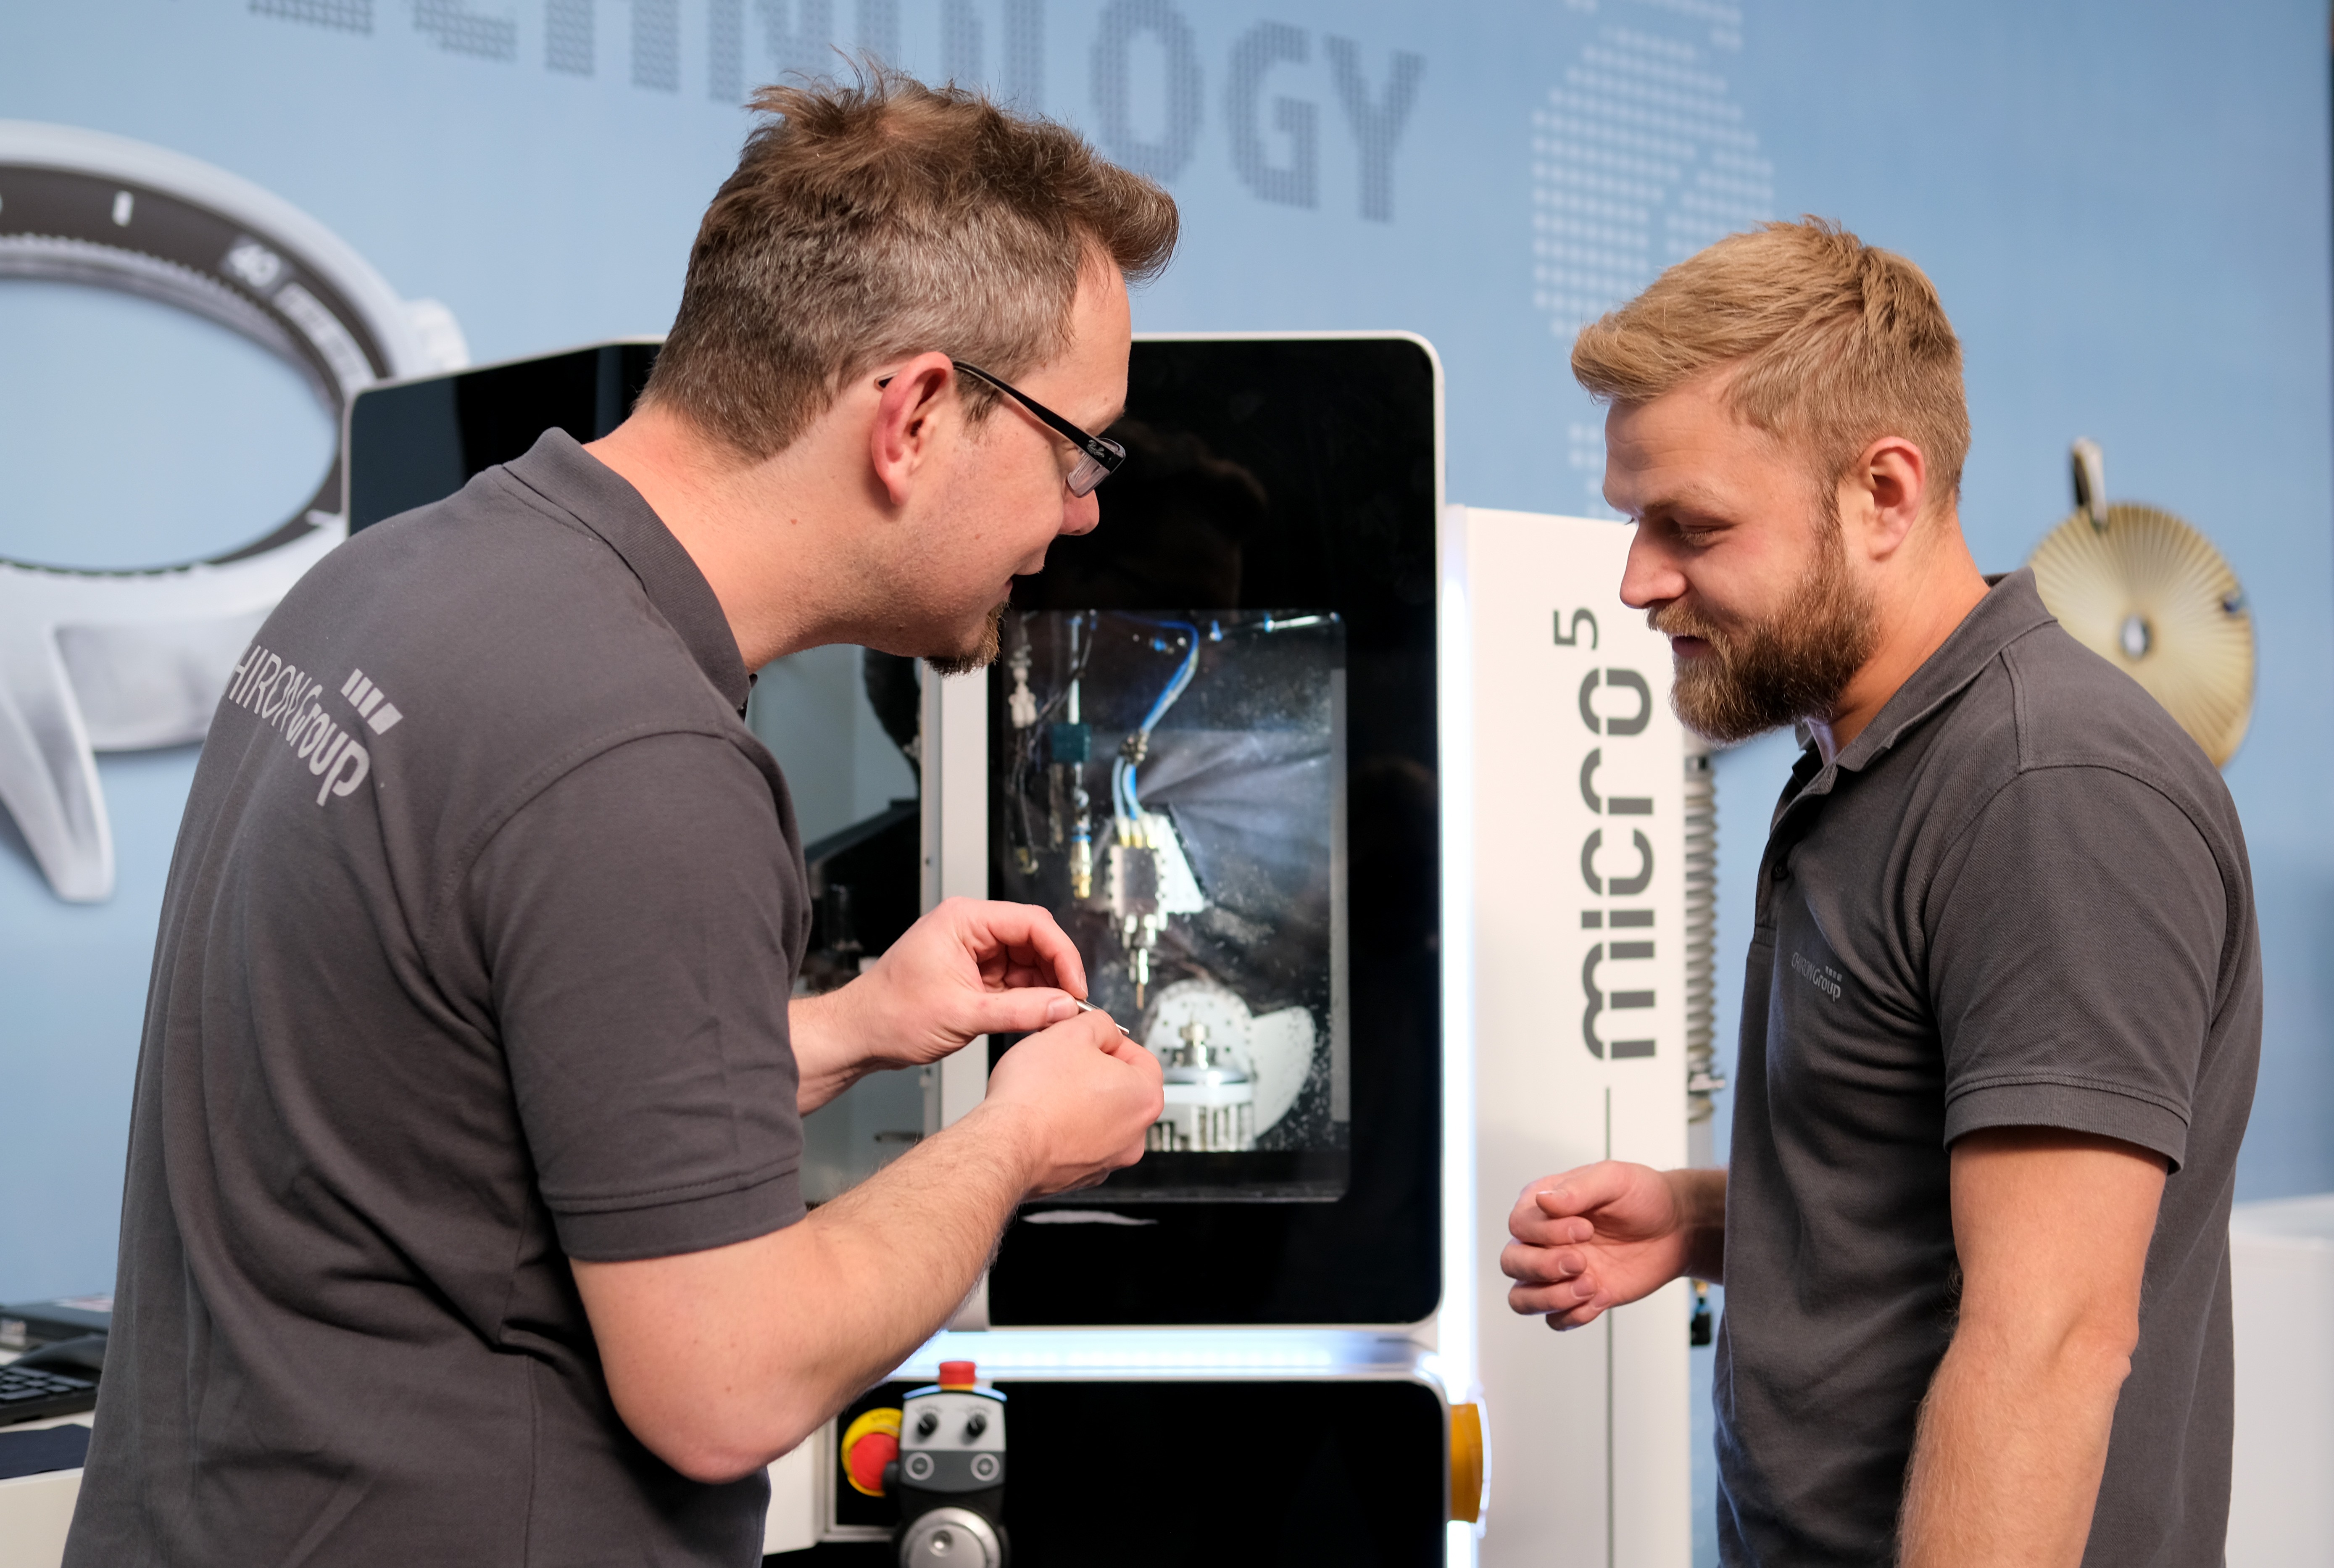 Extremely compact and highly dynamic: The Micro5 machining center ensures maximum efficiency in micro-machining.